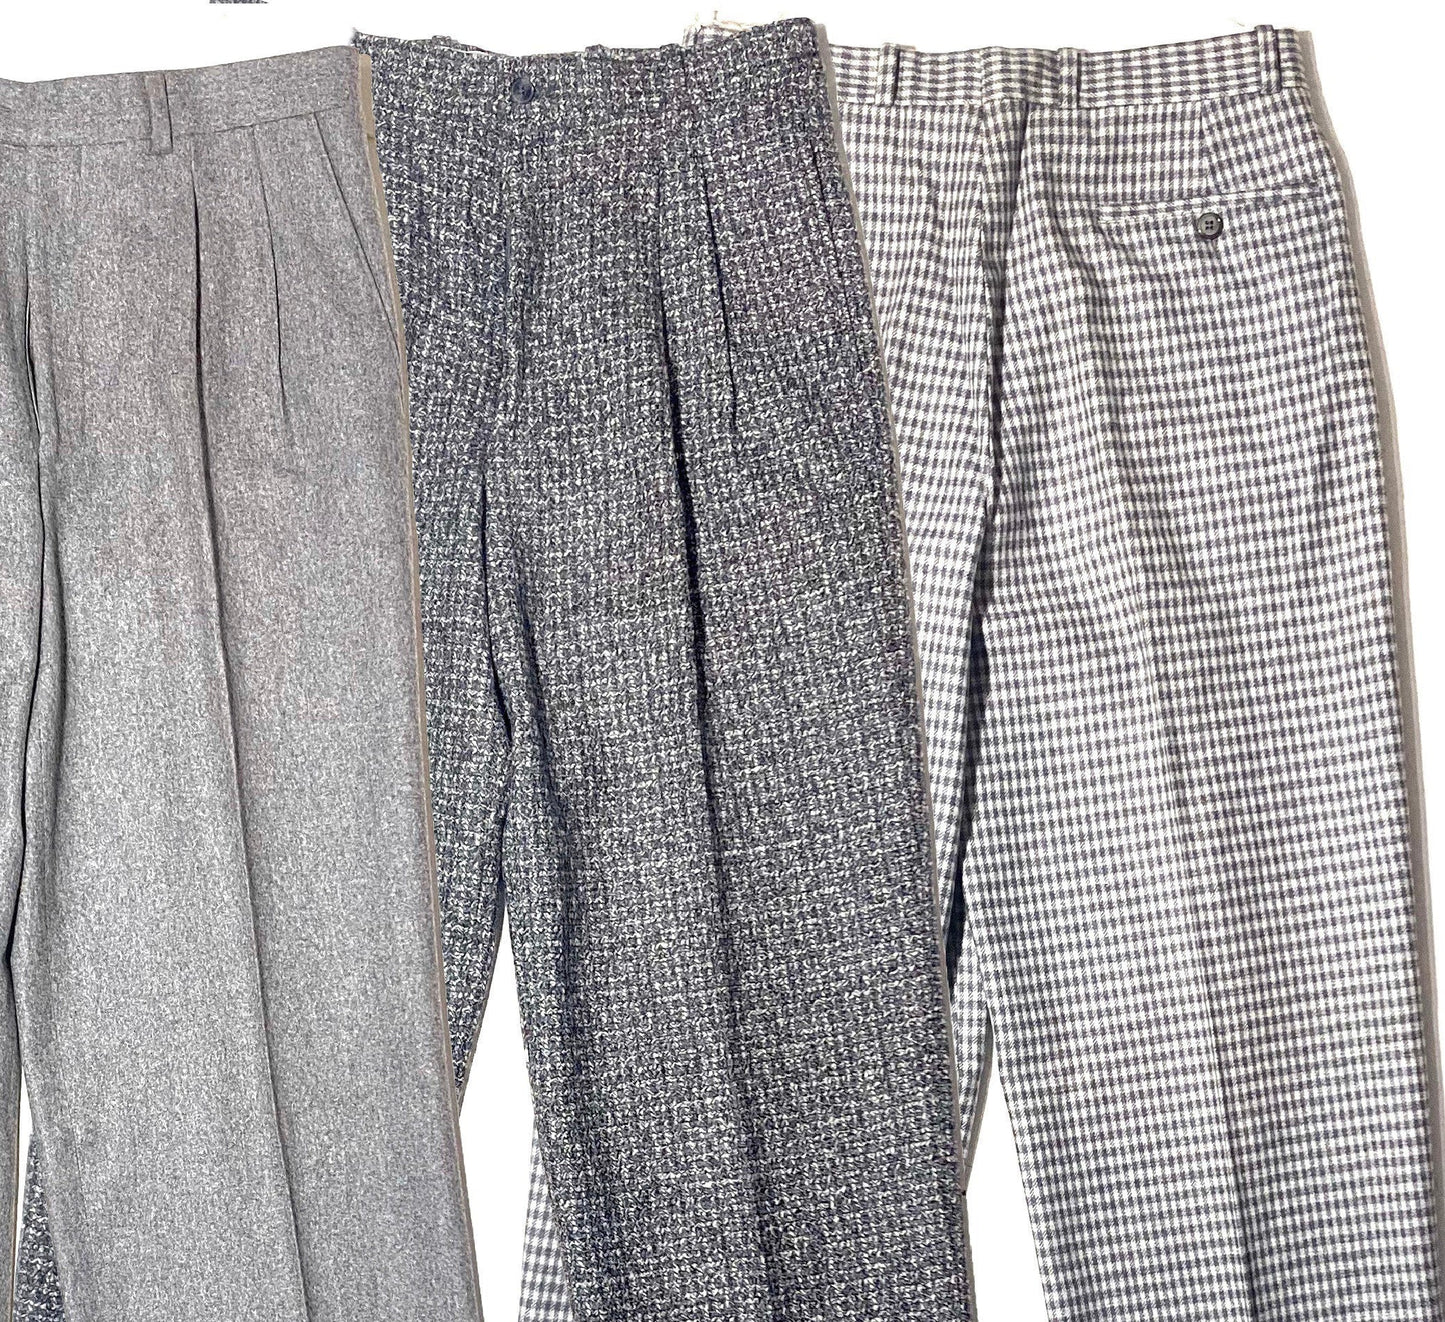 Givenchy elegant grey wool trousers, 3 patterns/ textures and sizes, new old stock 80s